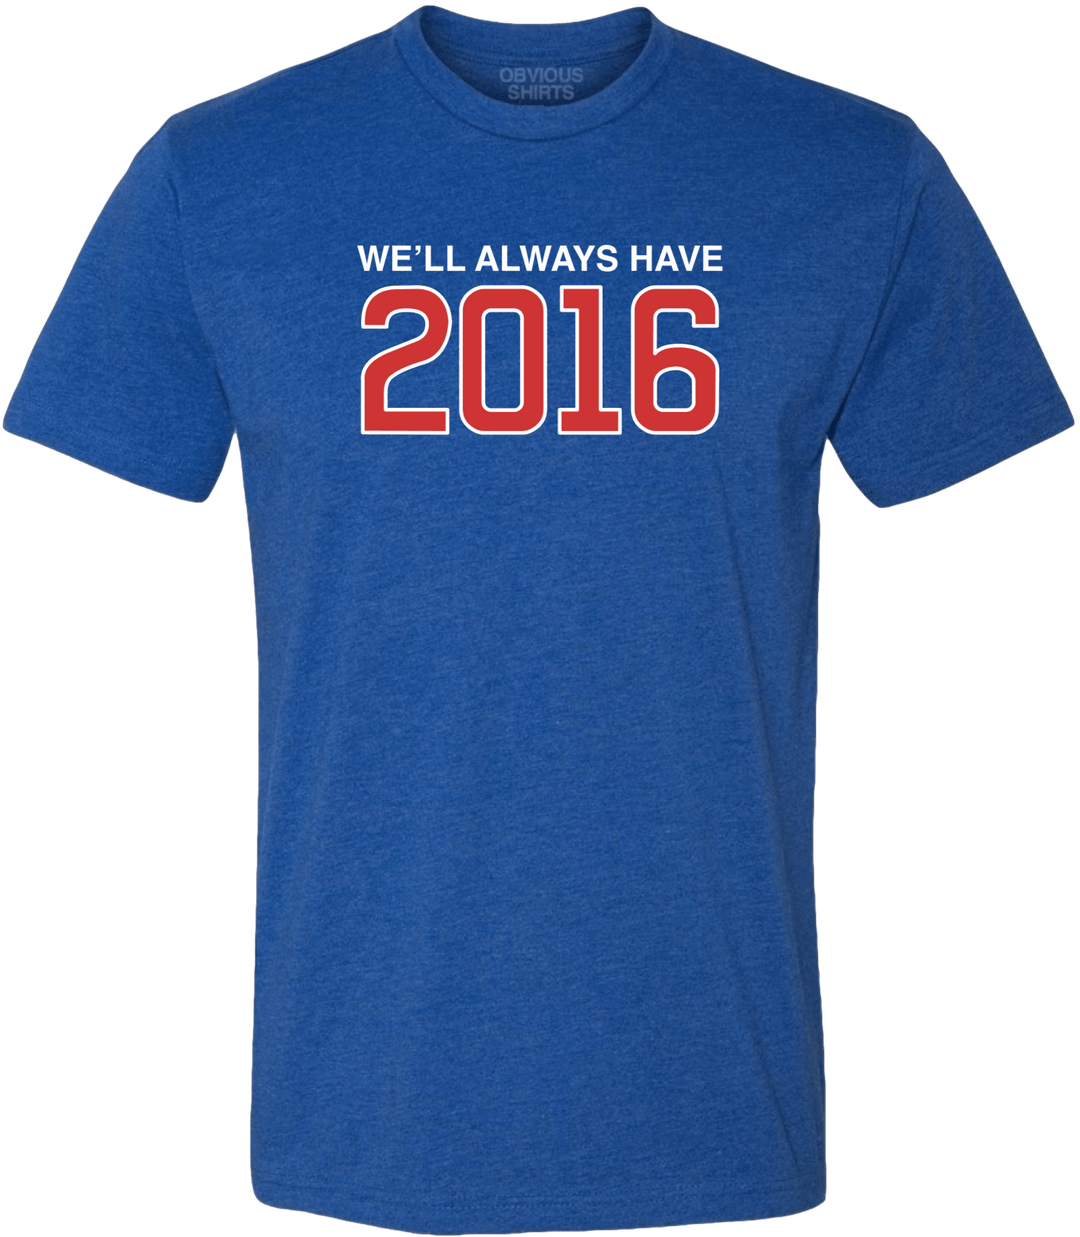 WE'LL ALWAYS HAVE 2016. - OBVIOUS SHIRTS